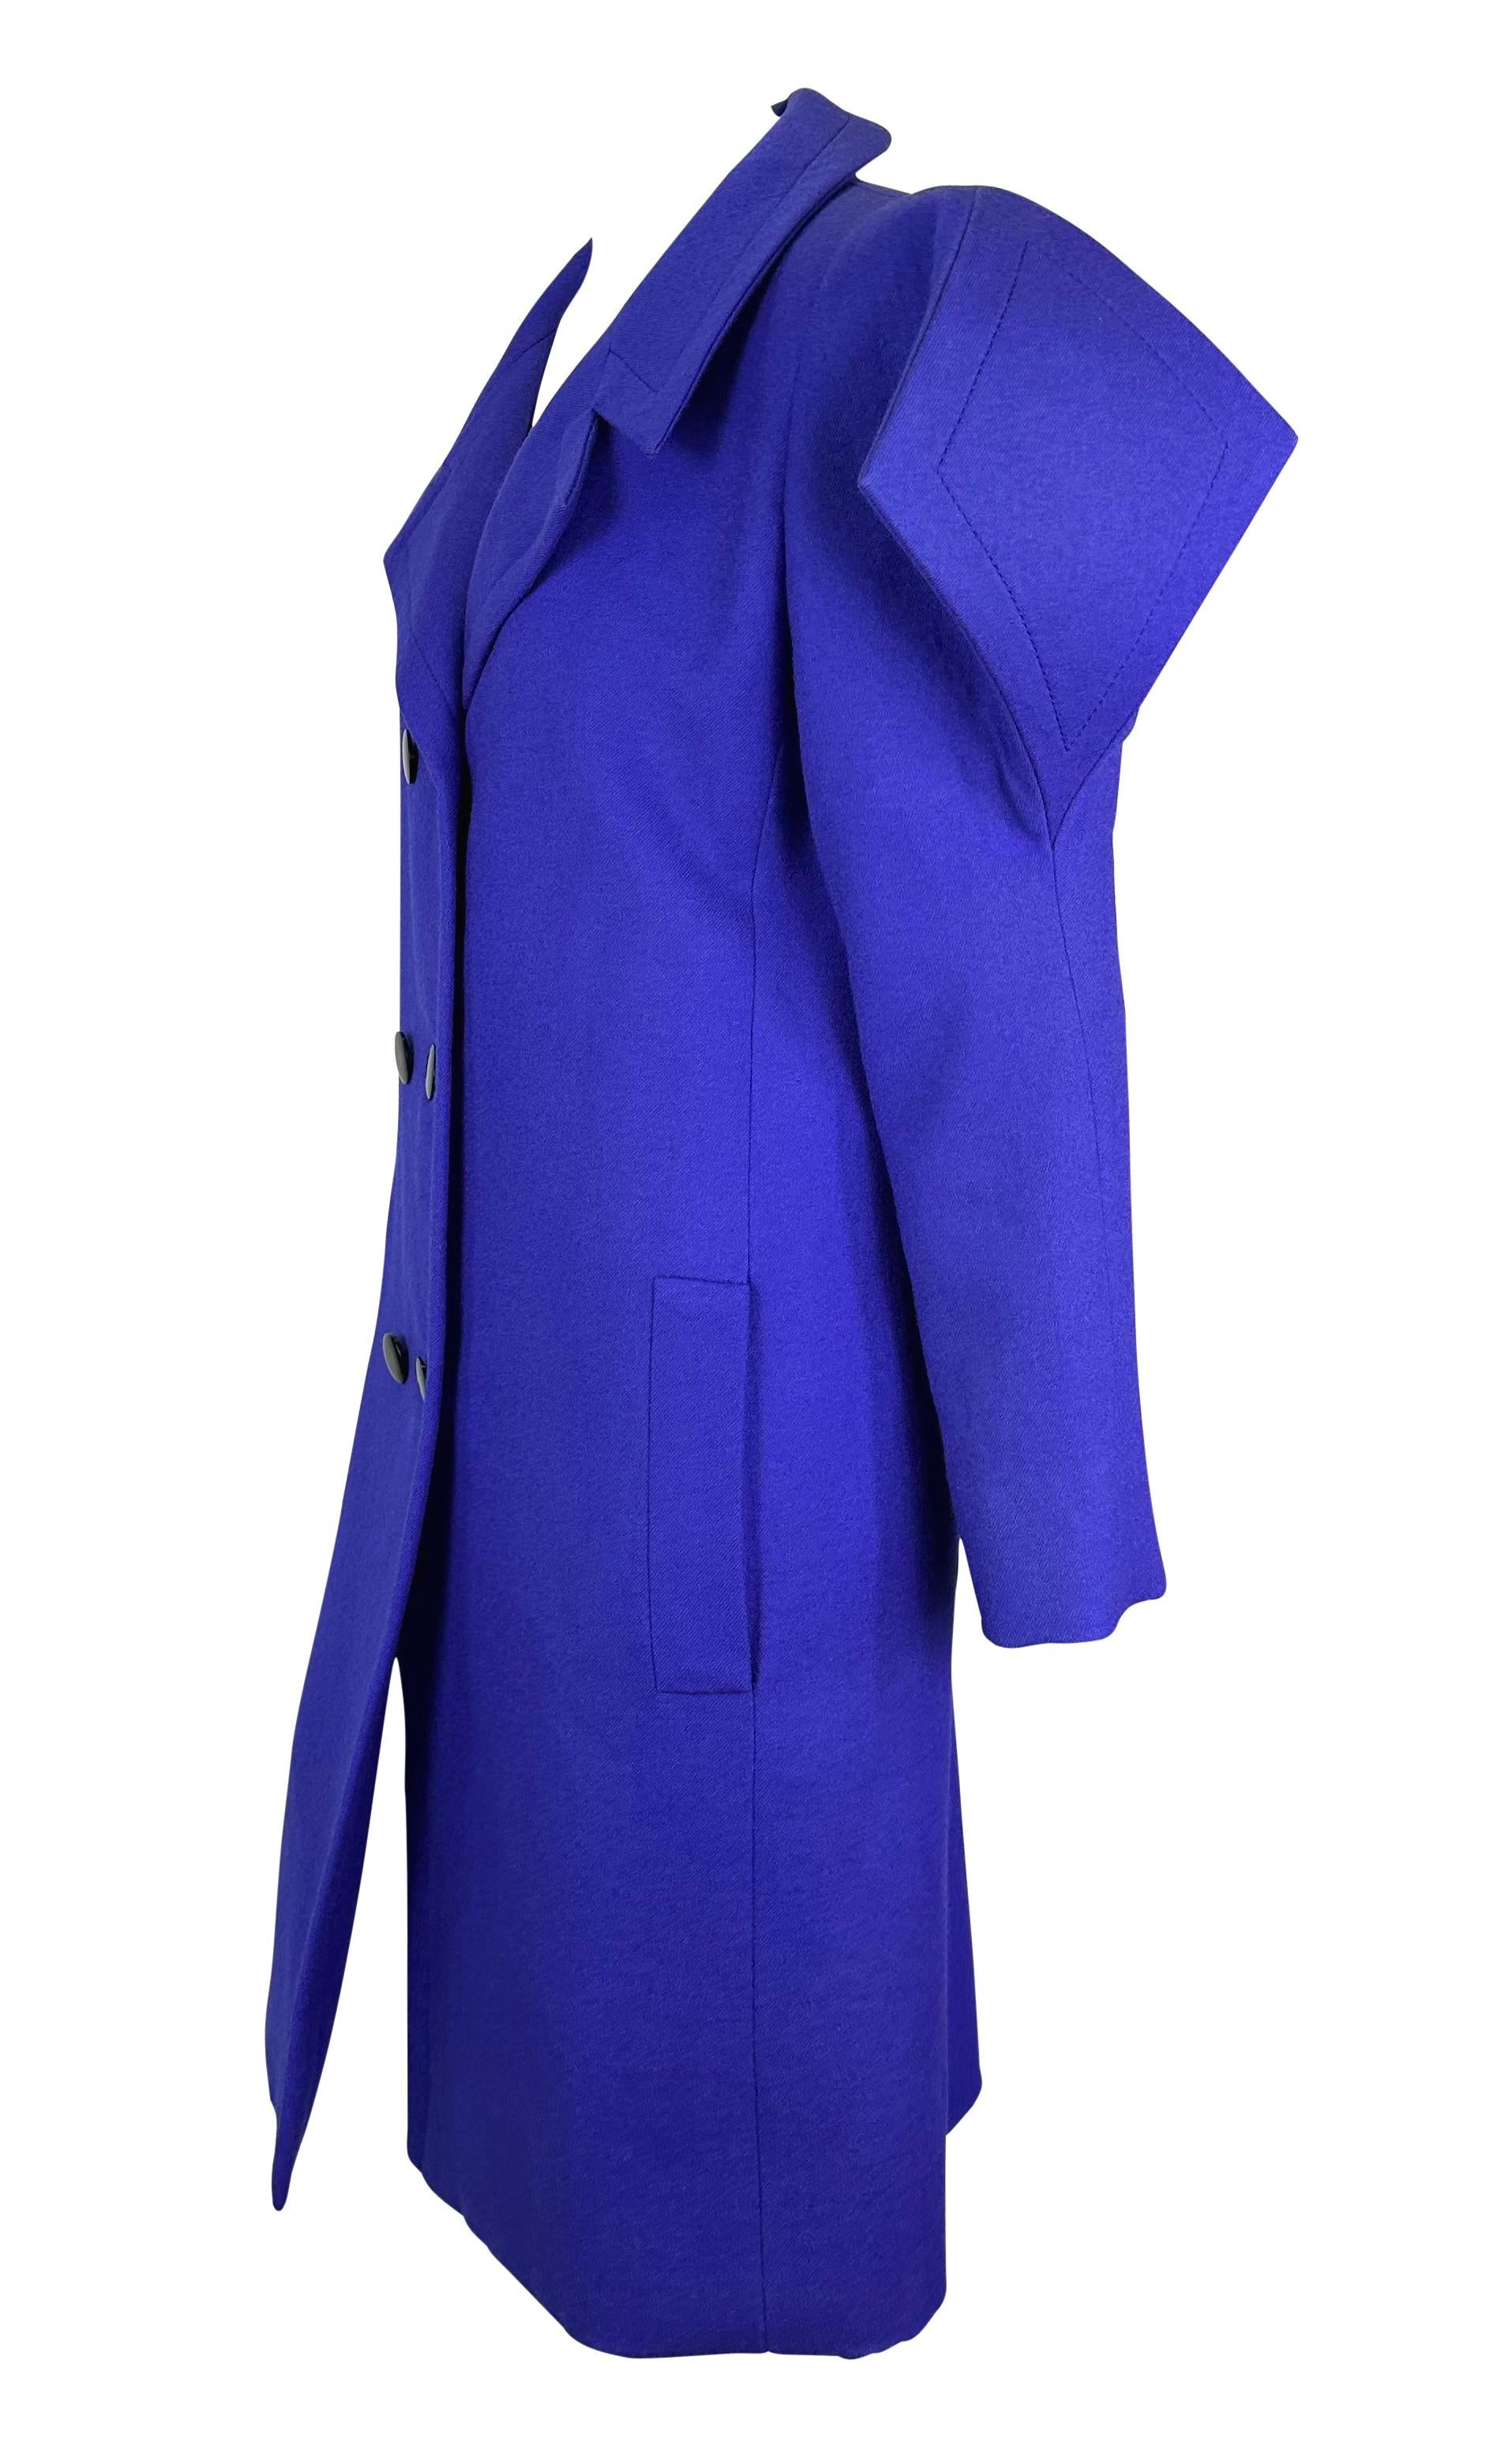 S/S 1982 Pierre Cardin Haute Couture Purple Double Breasted Jacket  In Excellent Condition For Sale In West Hollywood, CA